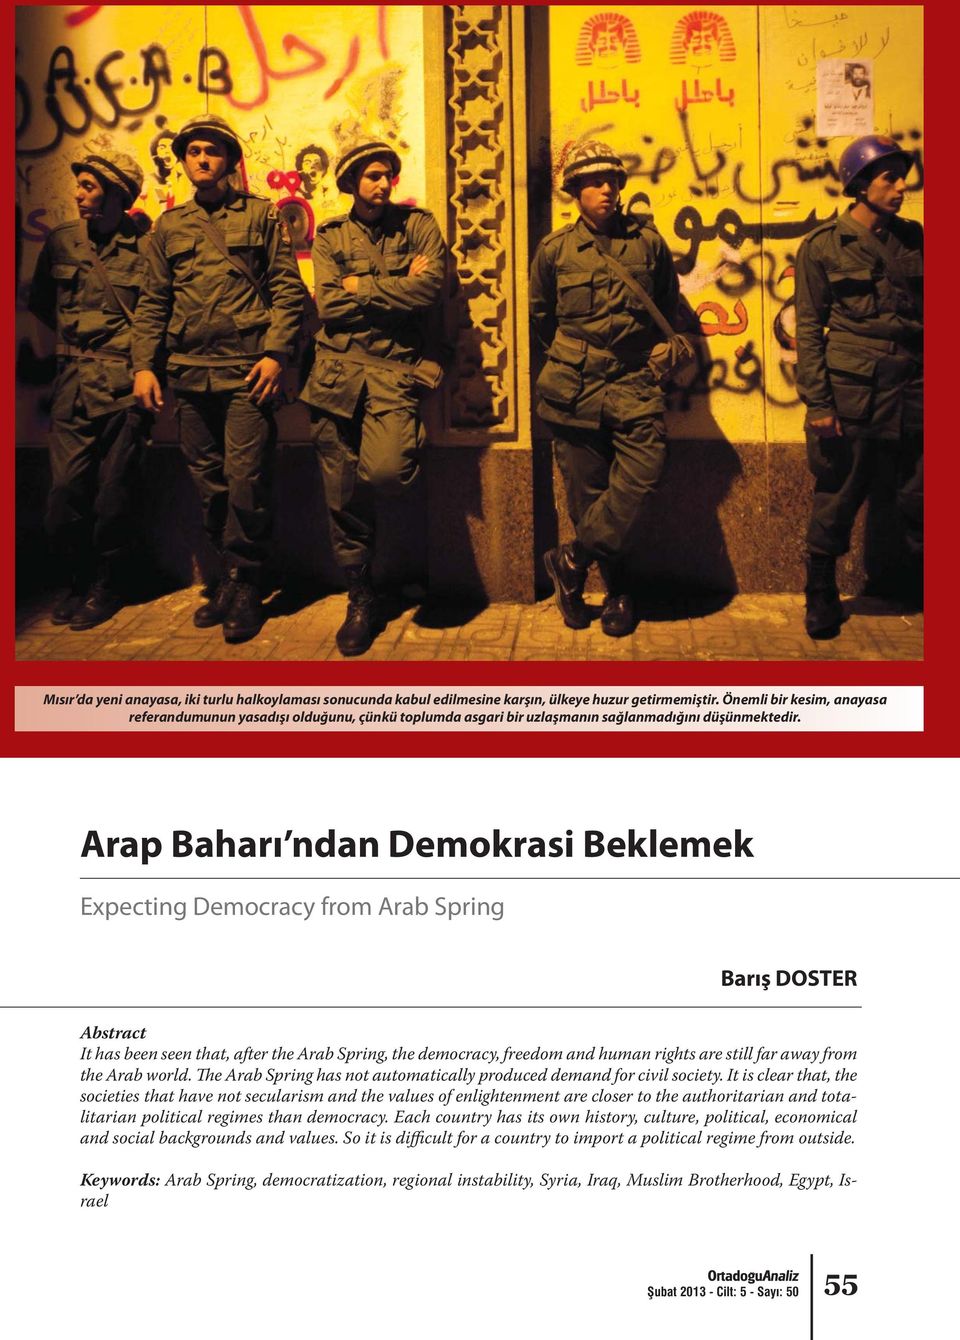 Arap Baharı ndan Demokrasi Beklemek Expecting Democracy from Arab Spring Barış DOSTER Abstract It has been seen that, after the Arab Spring, the democracy, freedom and human rights are still far away